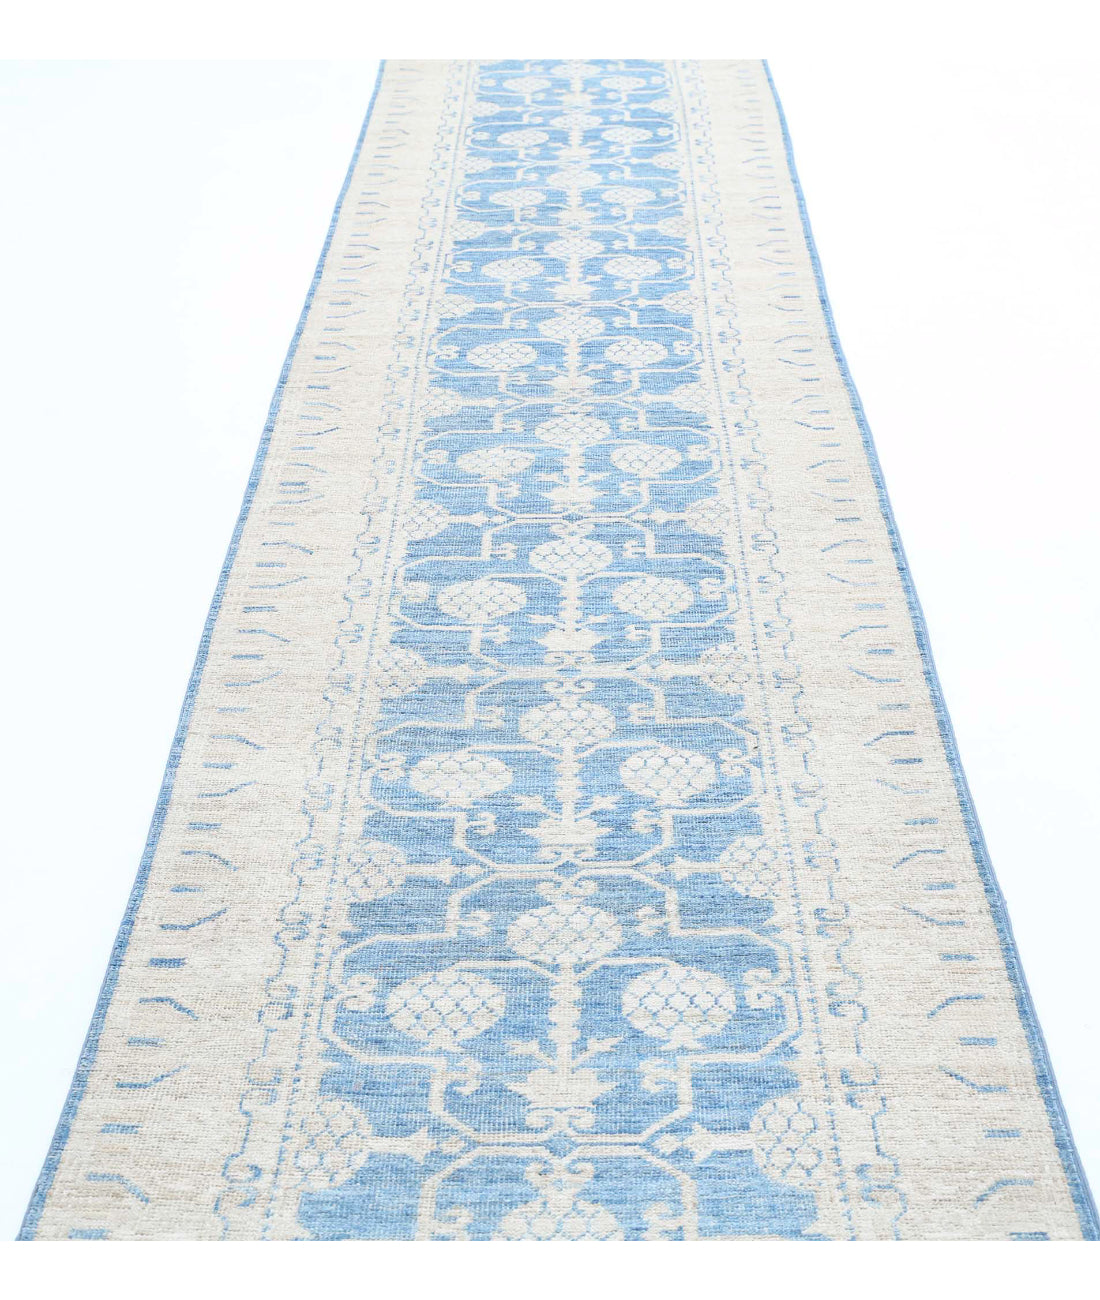 Serenity 3'0'' X 17'4'' Hand-Knotted Wool Rug 3'0'' x 17'4'' (90 X 520) / Blue / Ivory